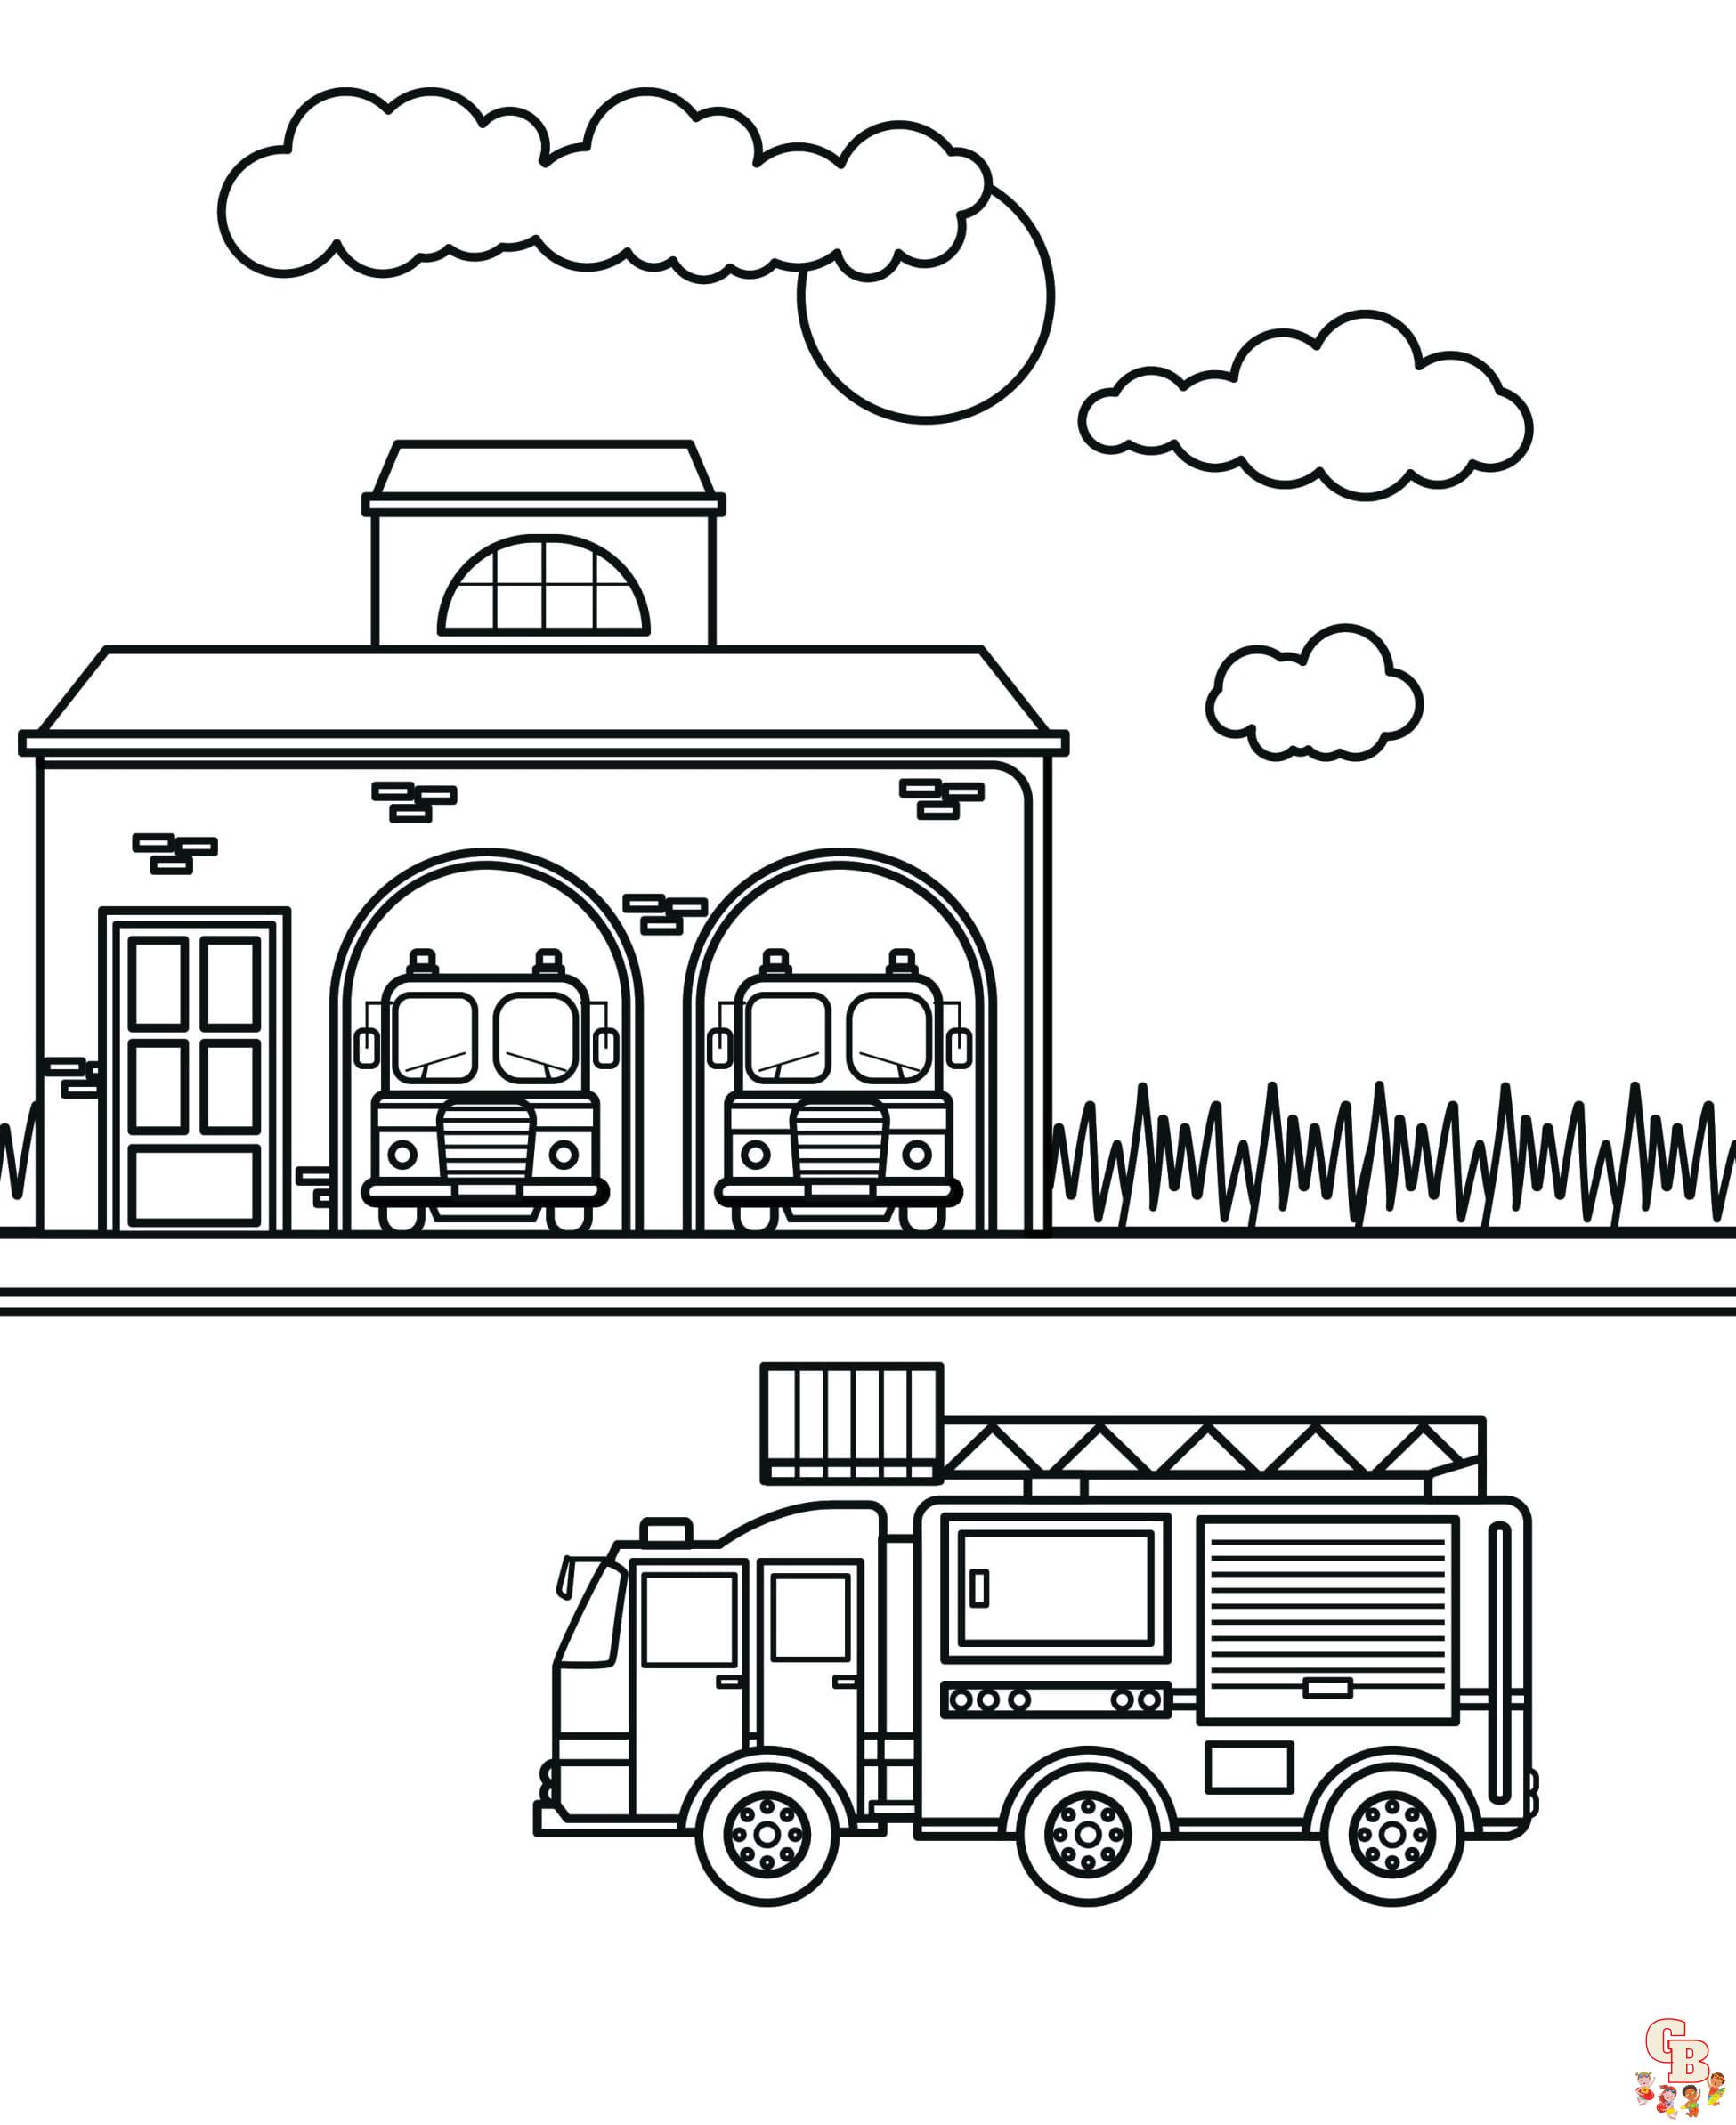 https://gbcoloring.com/wp-content/uploads/2023/10/Fire-station-coloring-pages-printable.jpg